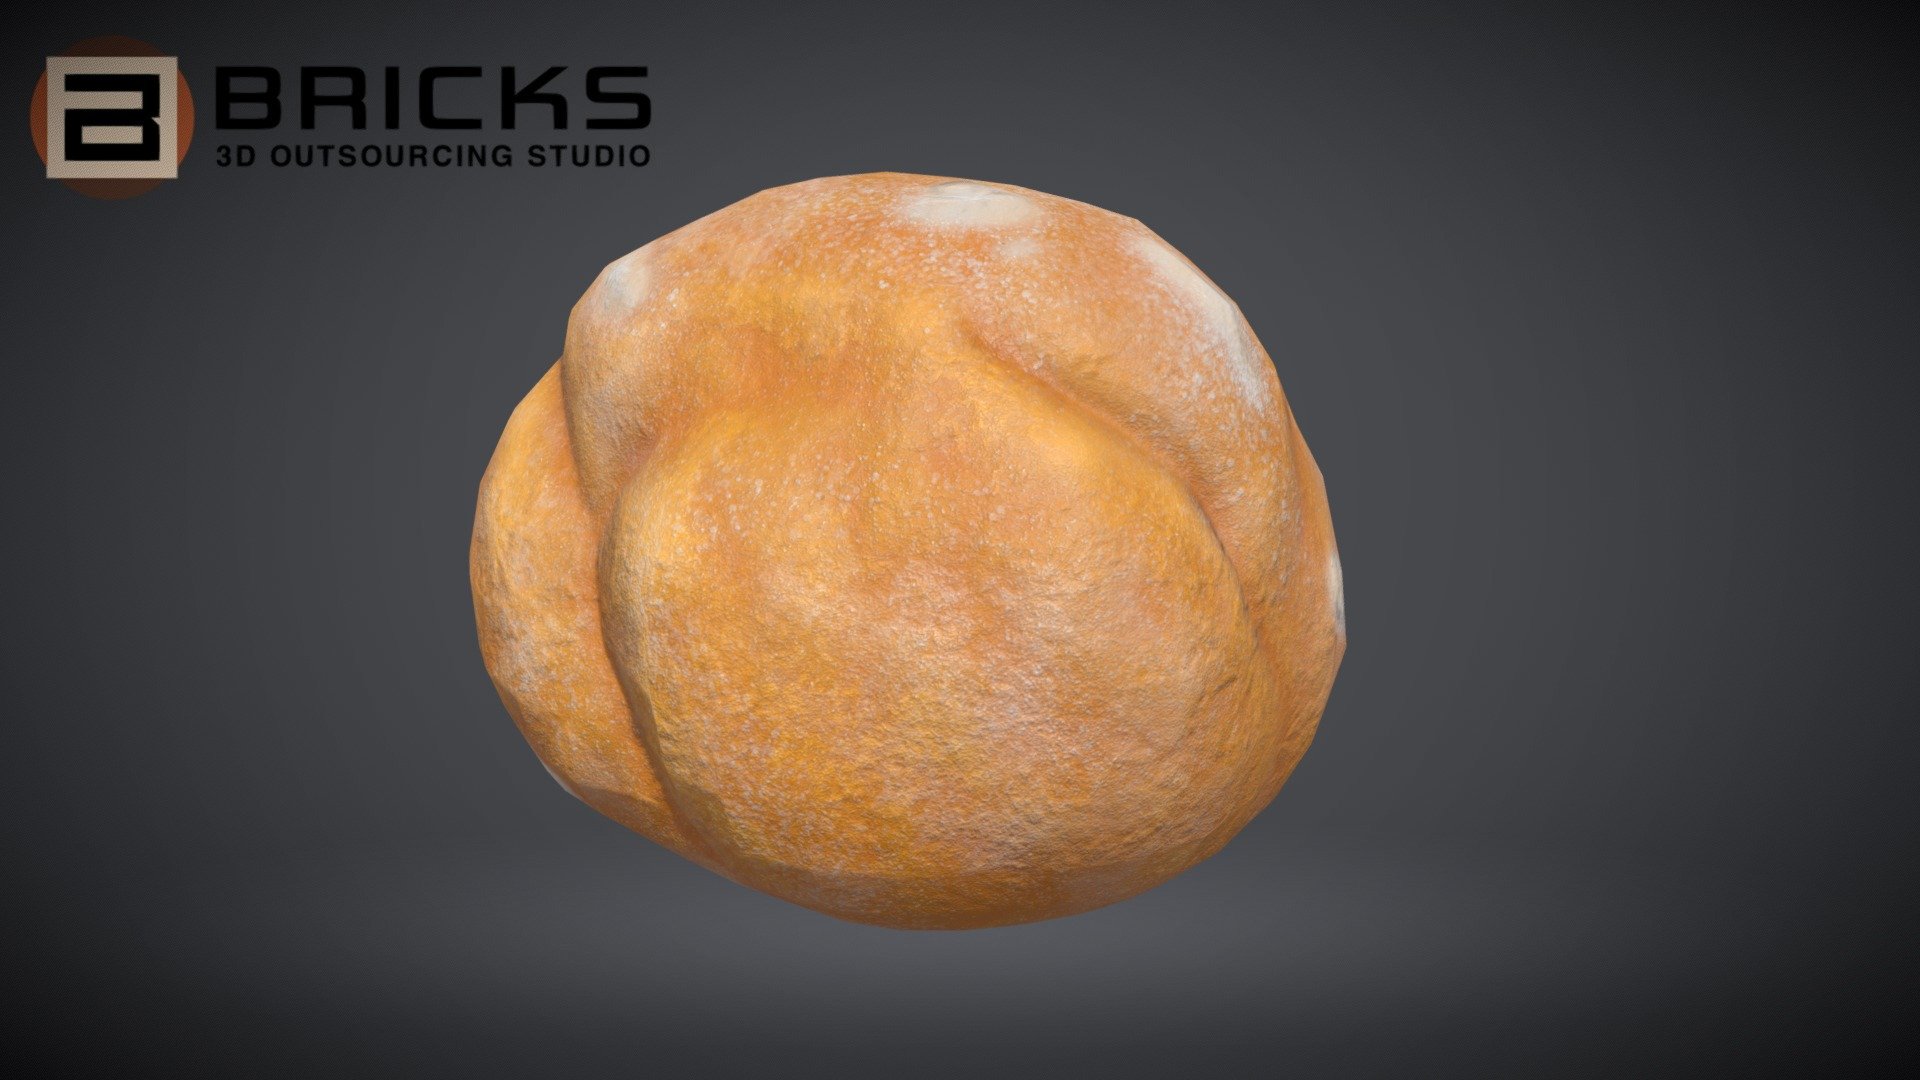 PBR Food Asset:
CreamPuff
Polycount: 1170
Vertex count: 695
Texture Size: 2048px x 2048px
Normal: OpenGL

If you need any adjust in file please contact us: team@bricks3dstudio.com

Hire us: tringuyen@bricks3dstudio.com
Here is us: https://www.bricks3dstudio.com/
        https://www.artstation.com/bricksstudio
        https://www.facebook.com/Bricks3dstudio/
        https://www.linkedin.com/in/bricks-studio-b10462252/ - Cream Puff - Buy Royalty Free 3D model by bricks3dstudio 3d model